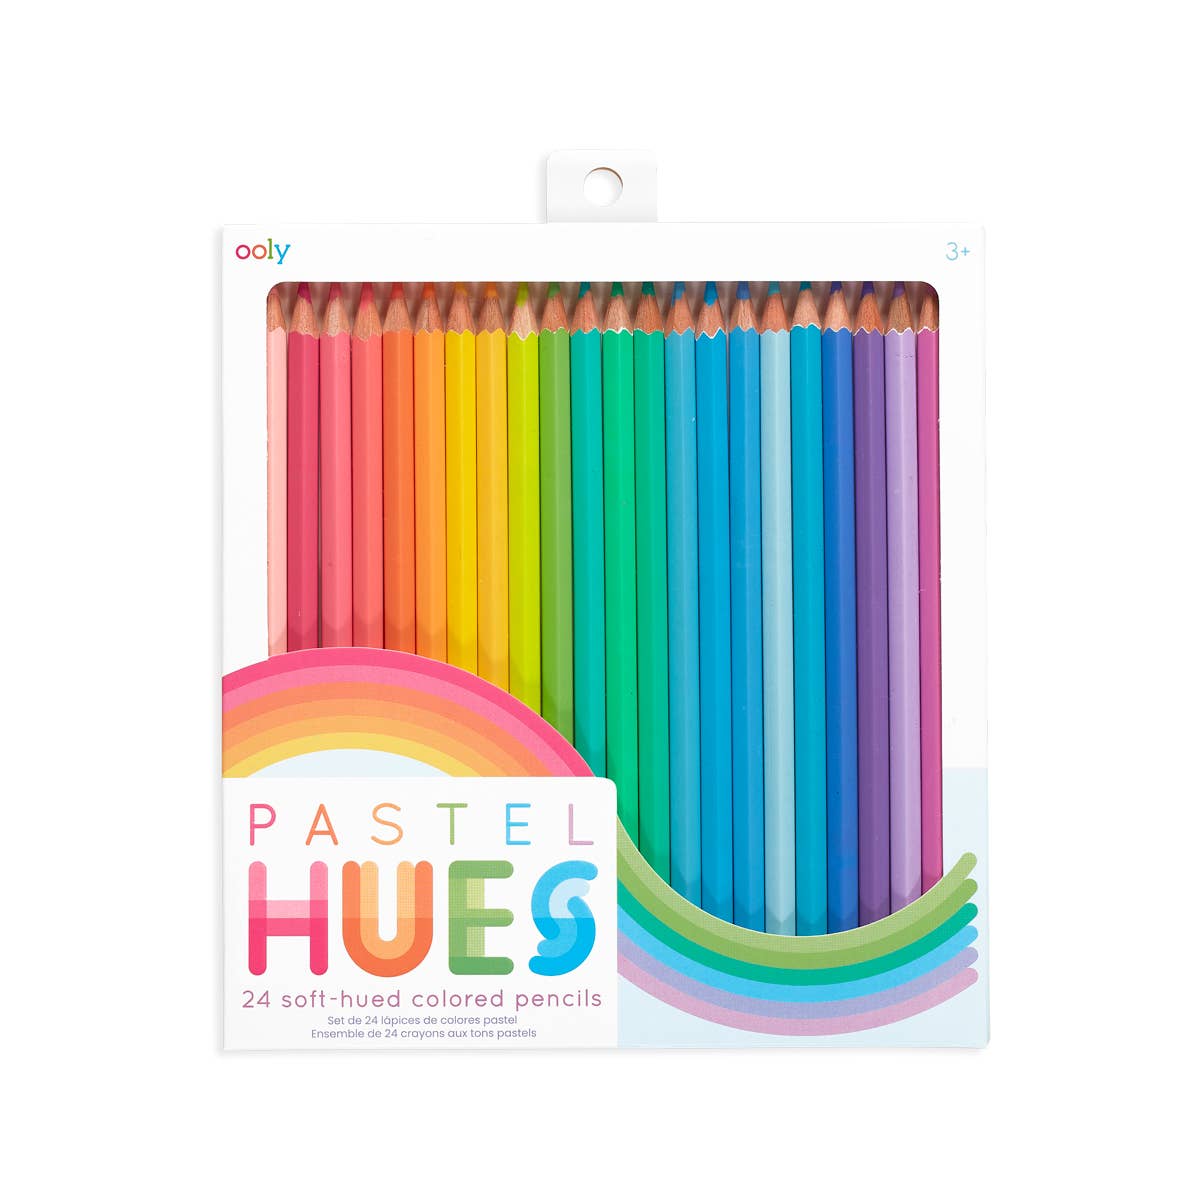 OOLY - Pastel Hues Colored Pencils - Set of 24